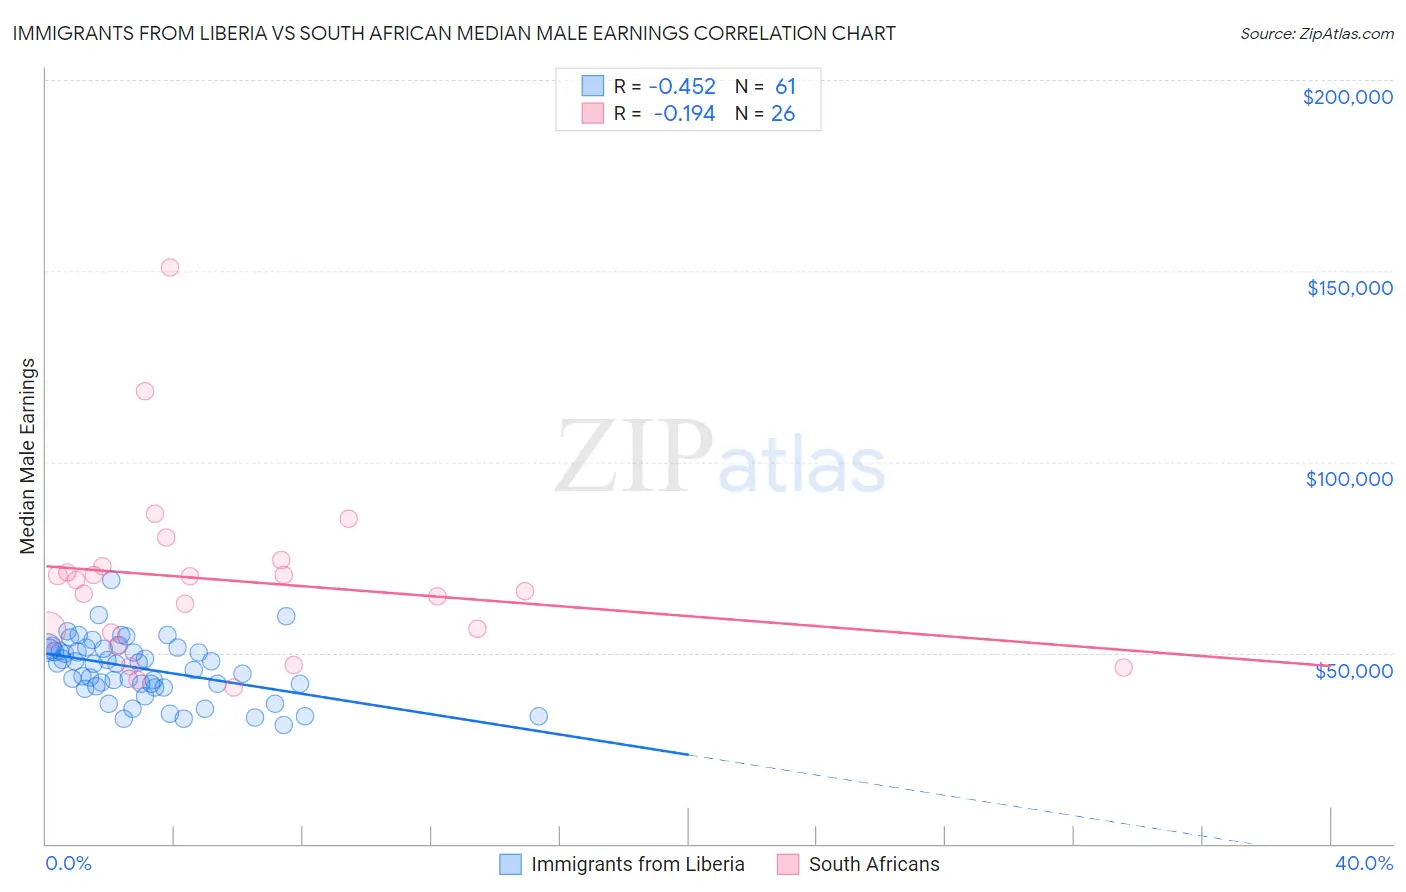 Immigrants from Liberia vs South African Median Male Earnings